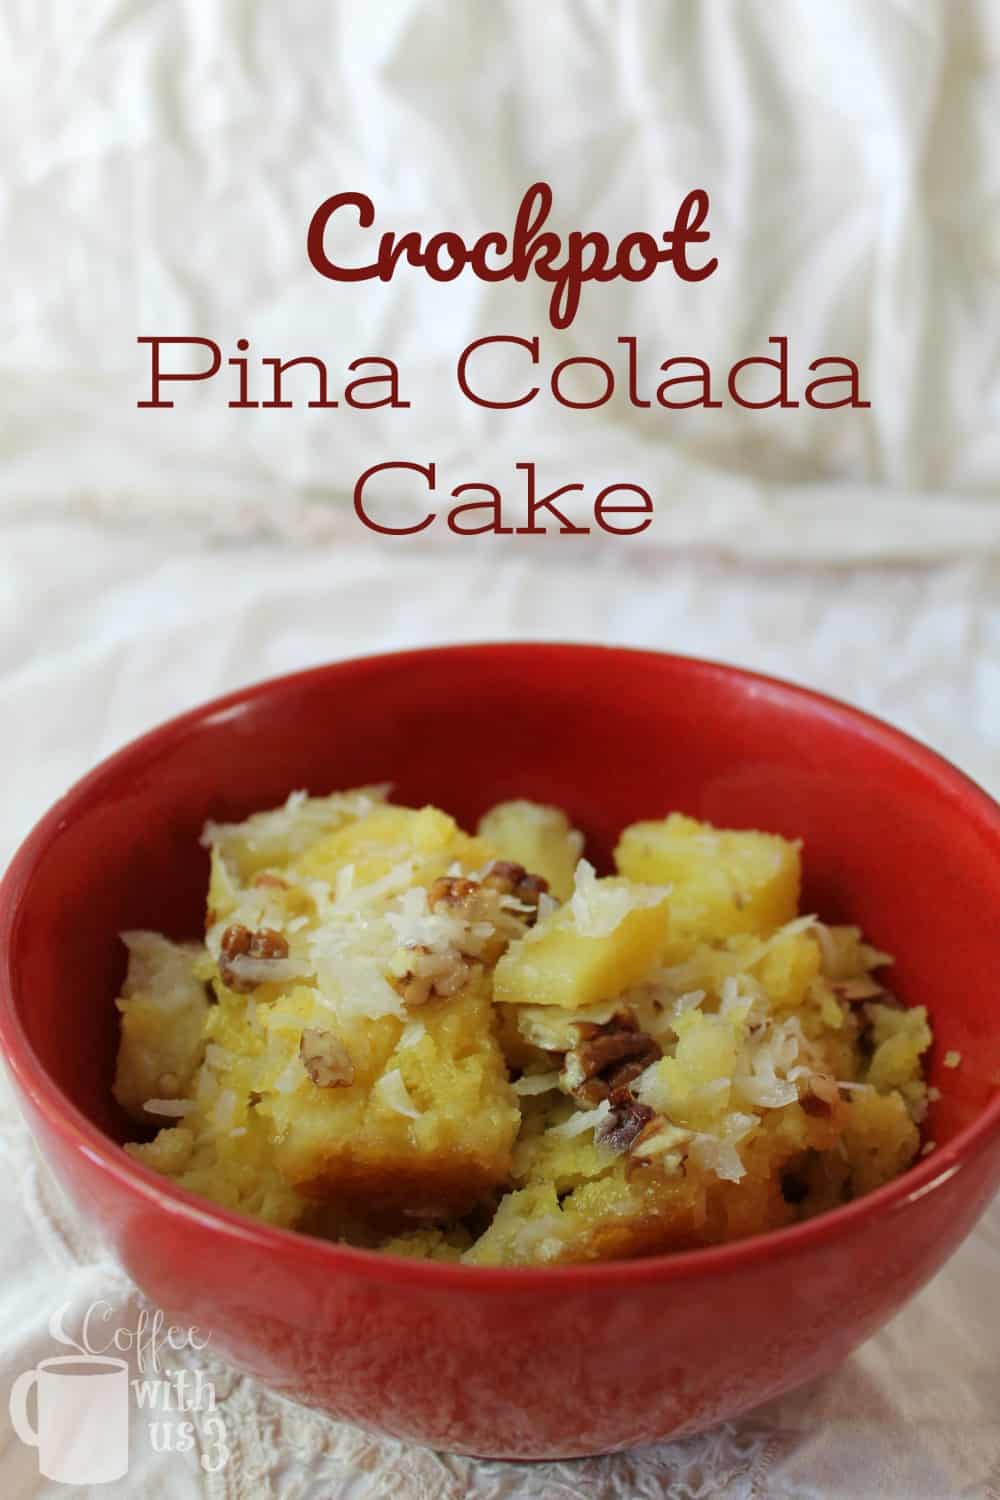 Sweet and tropical Crockpot Pina Colada Cake is a delicious dessert made in your slow cooker!